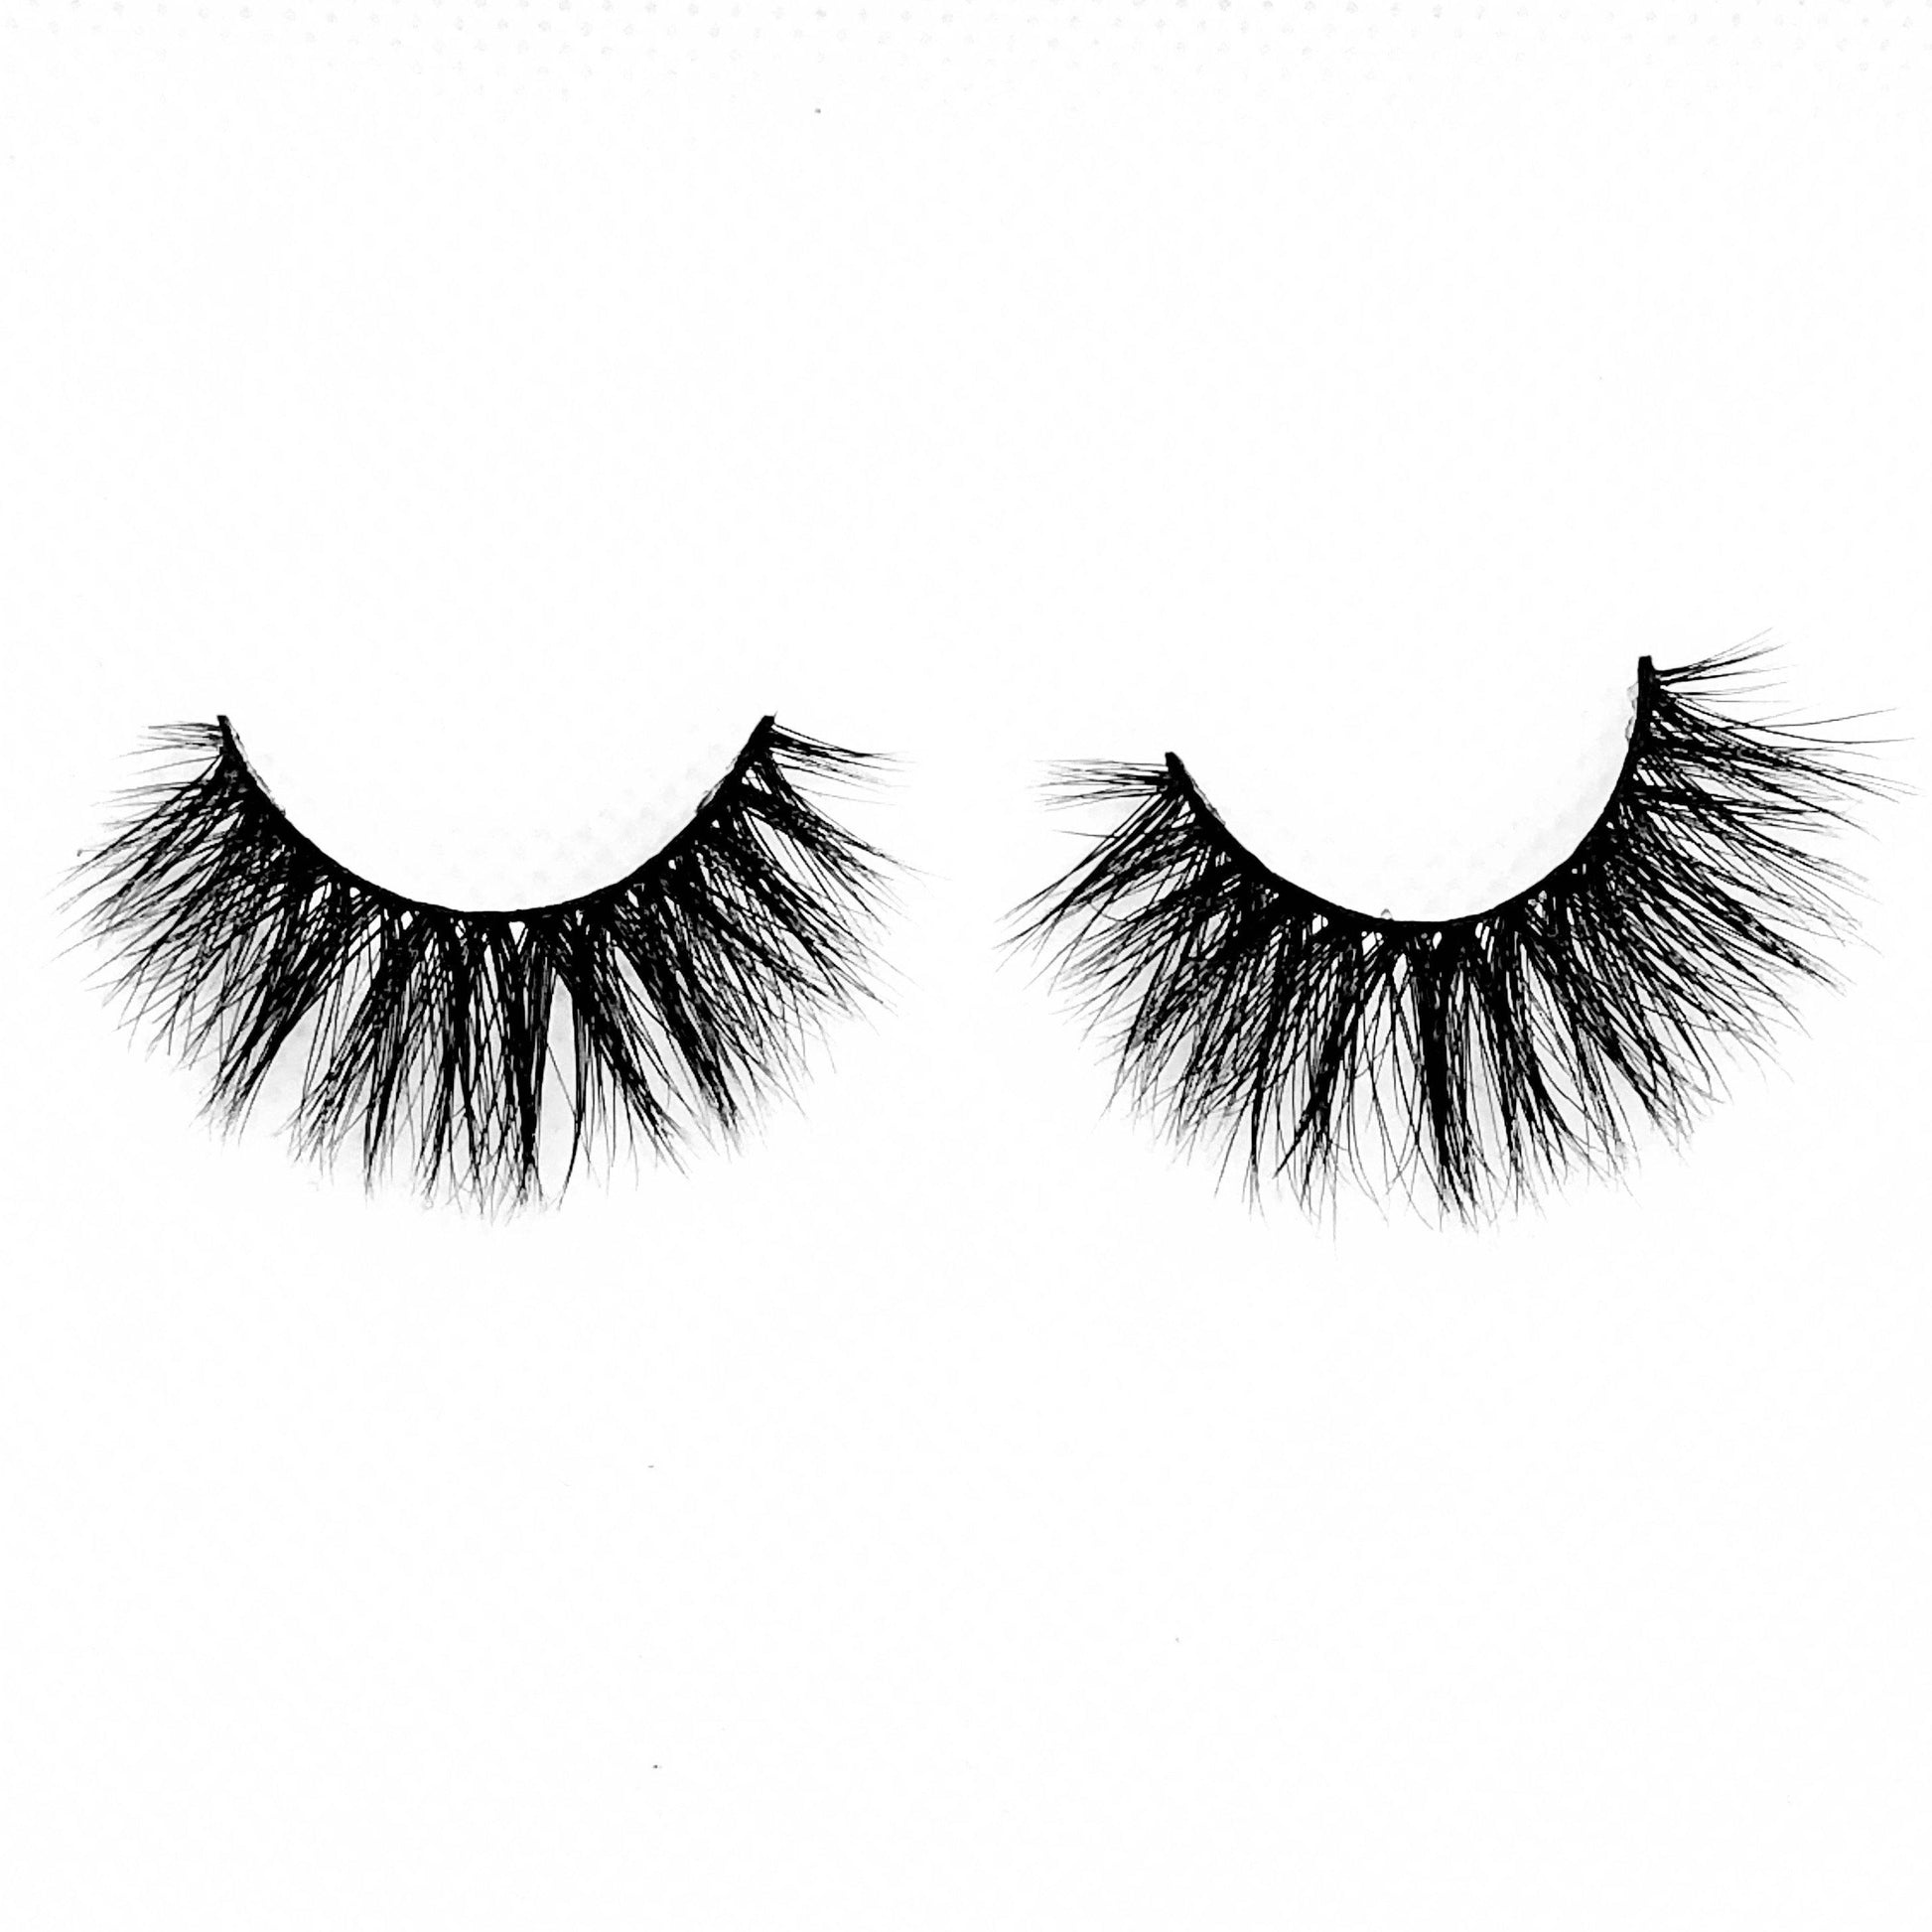 Princess-High Volume-Are you a full face of makeup type of girl? Make "Princess" your go-to mink lashes for a BOLD and SEXY look! "Princess" is for our PRETTY ladies that love the drama. These are extra fluffy, soft, and lightweight on your eyes. Full volume from root to end, you won't go unnoticed. Also available in our "Best Sellers (3-Pack)" and "Dramatic (3-Pack)" Description Handmade, Cruelty-Free, Wear up to 30x Material: 100% Mink Band: Thin, Black Cotton Band Volume: High Style: Dramatic